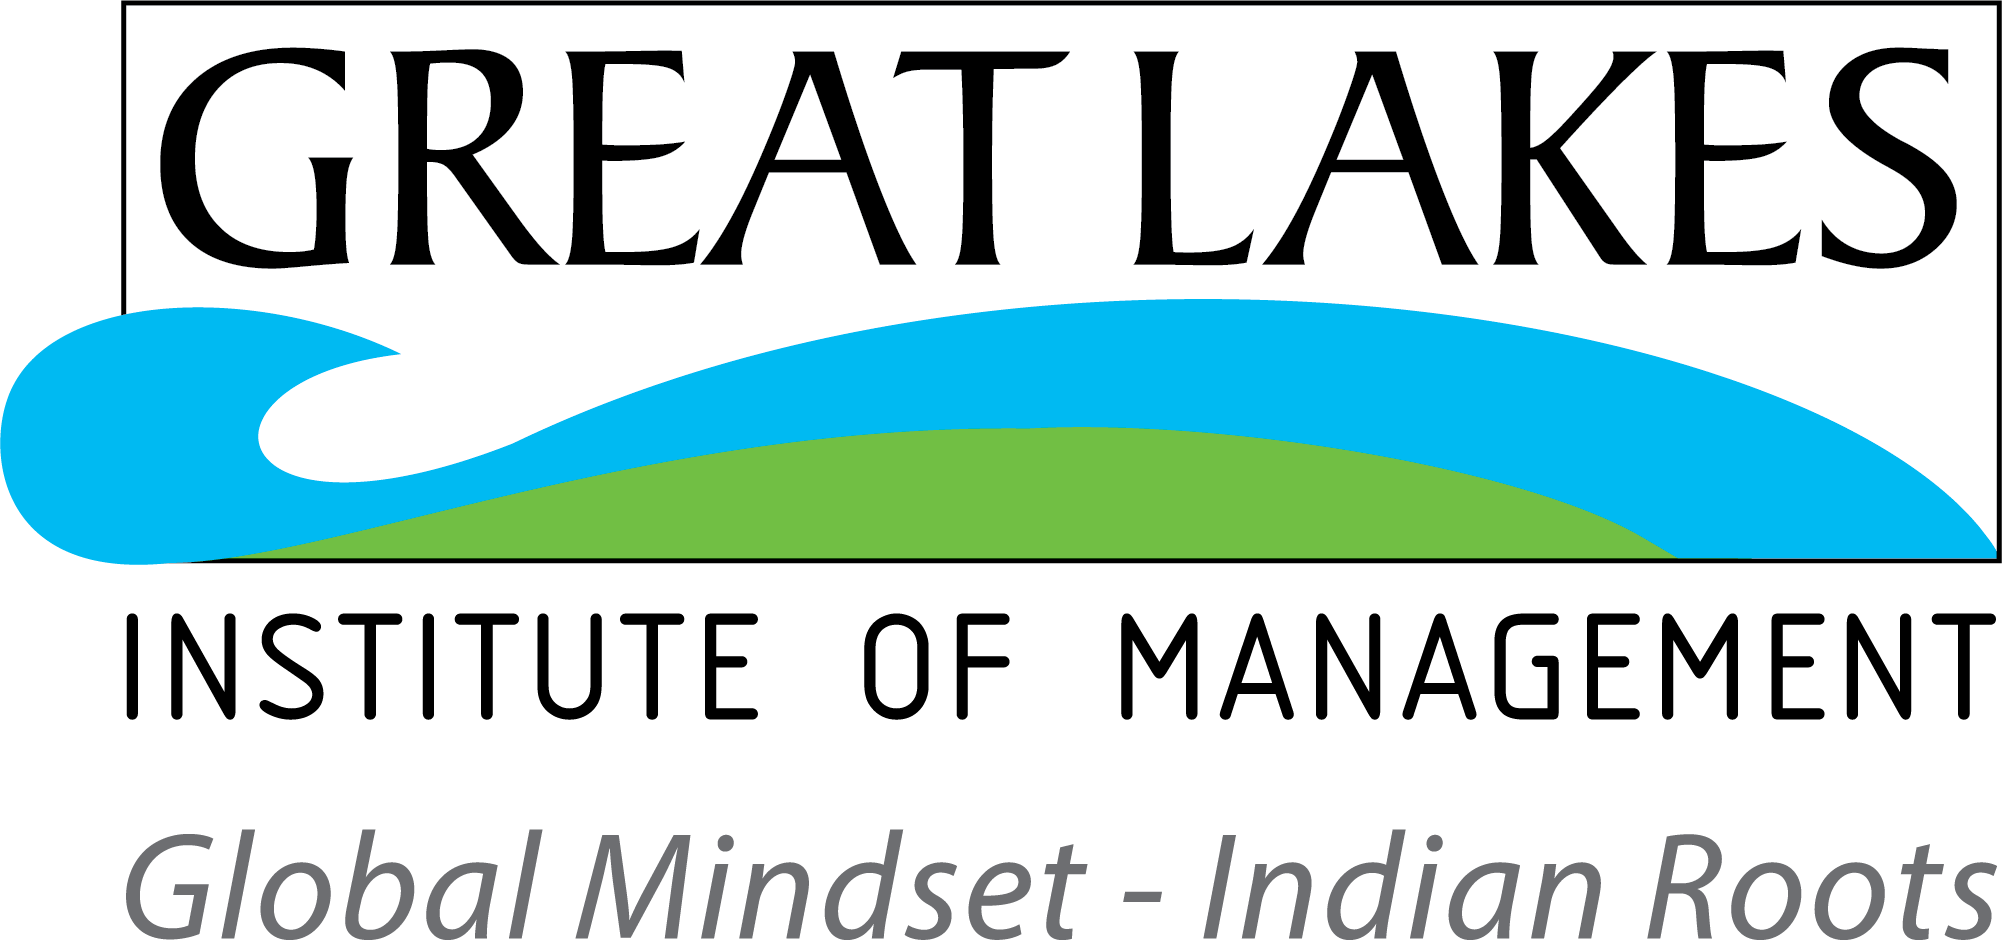 Great Lakes Institute Logo PNG